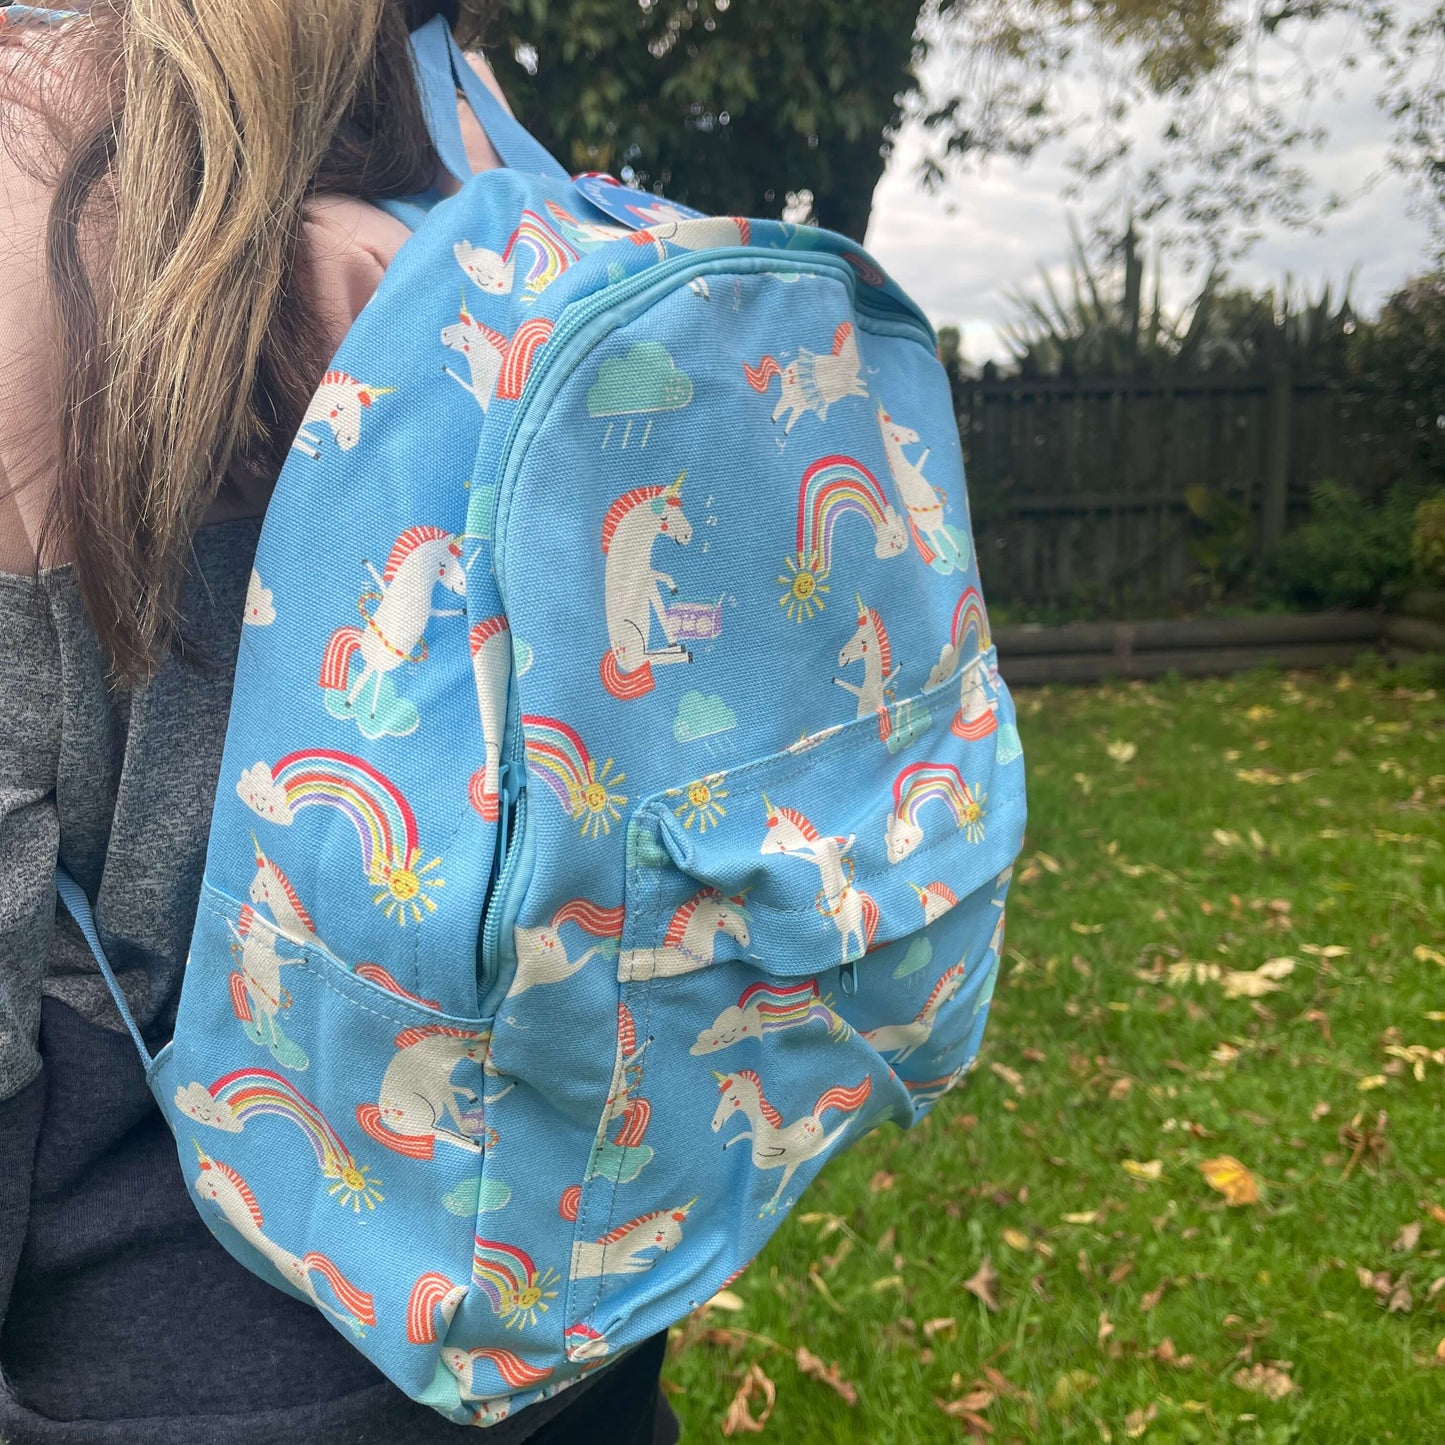 Girl wearing a sky blue backpack with unicorns and rainbows printed on it.